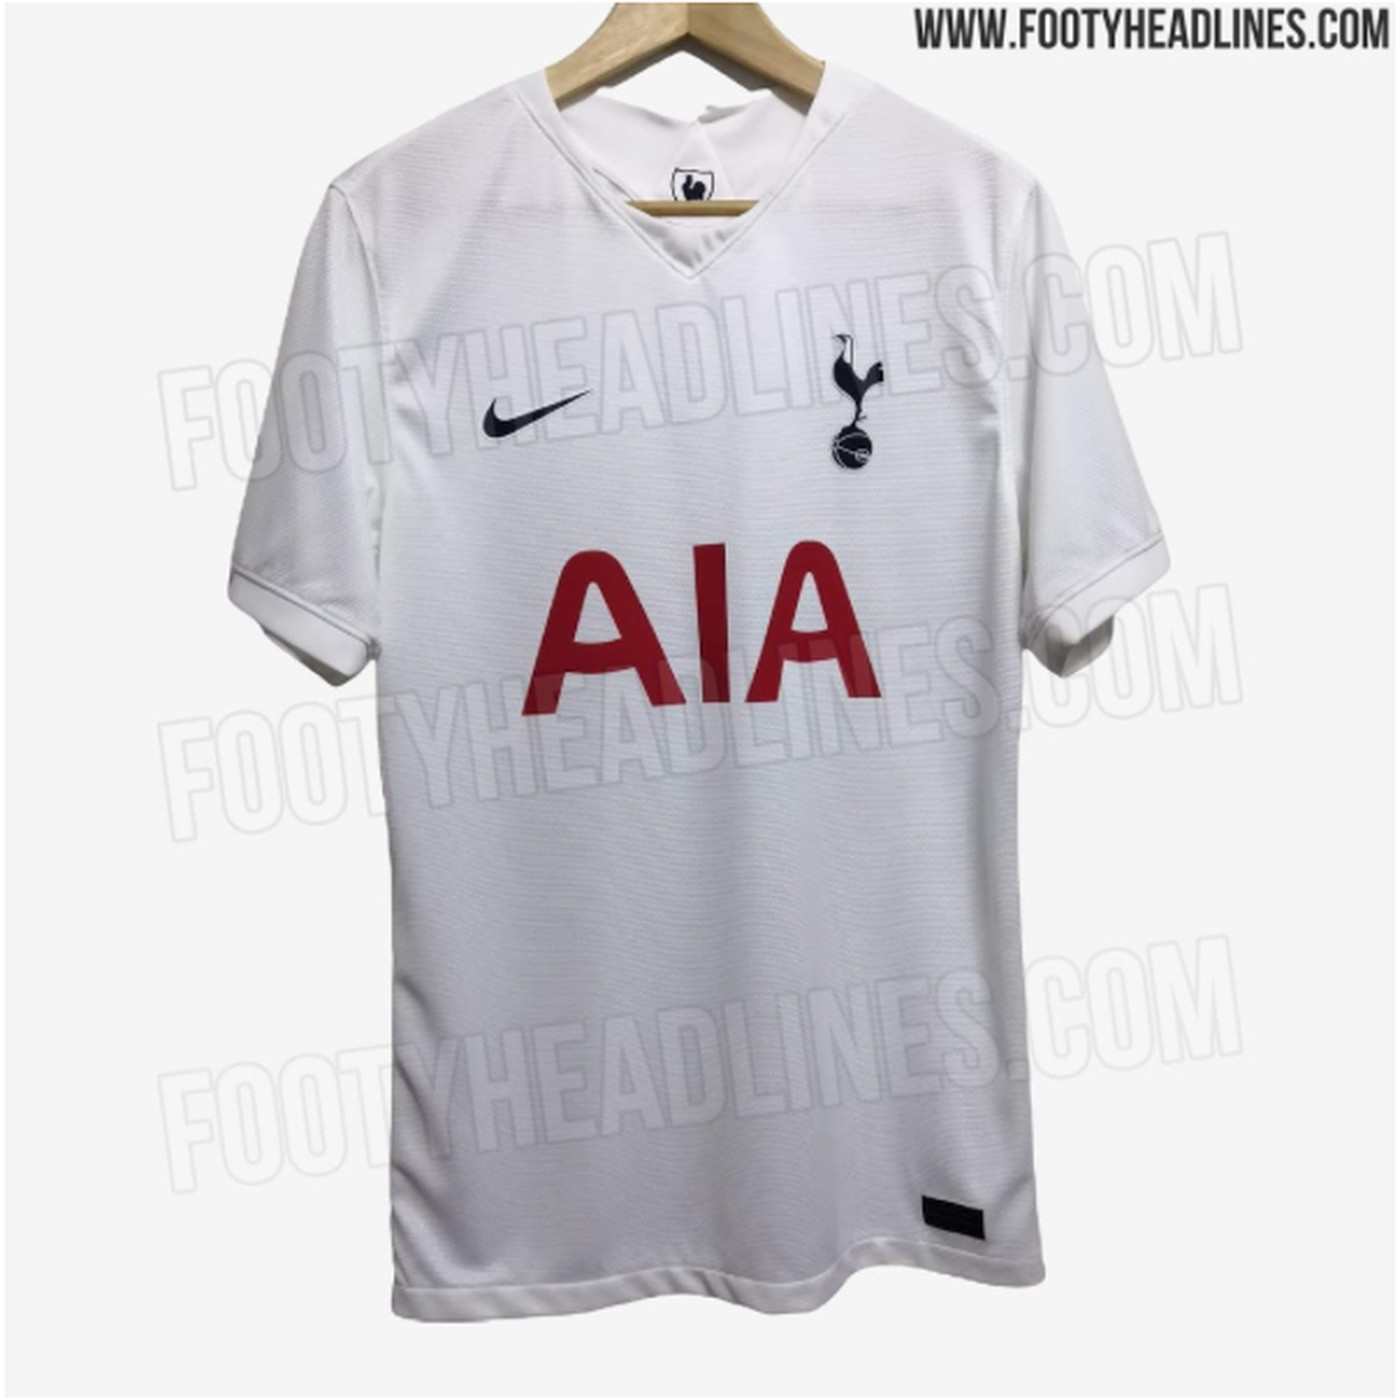 Tottenham's 2021-22 home kit has leaked on the internet, and